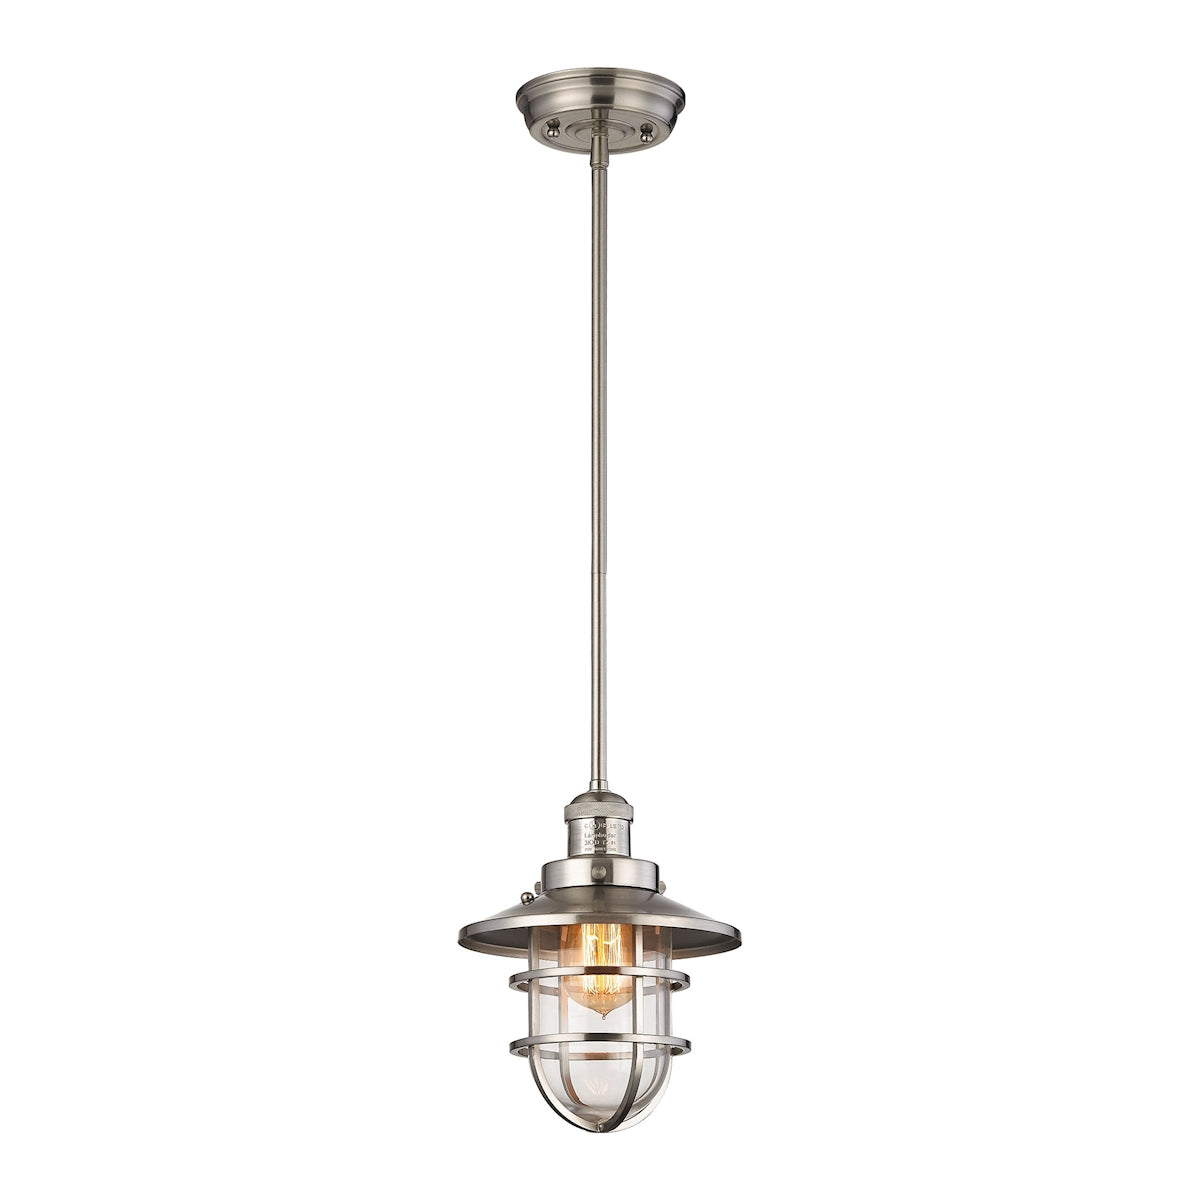 ELK Lighting 66354/1 - Seaport 8" Wide 1-Light Mini Pendant in Satin Nickel with Clear Glass